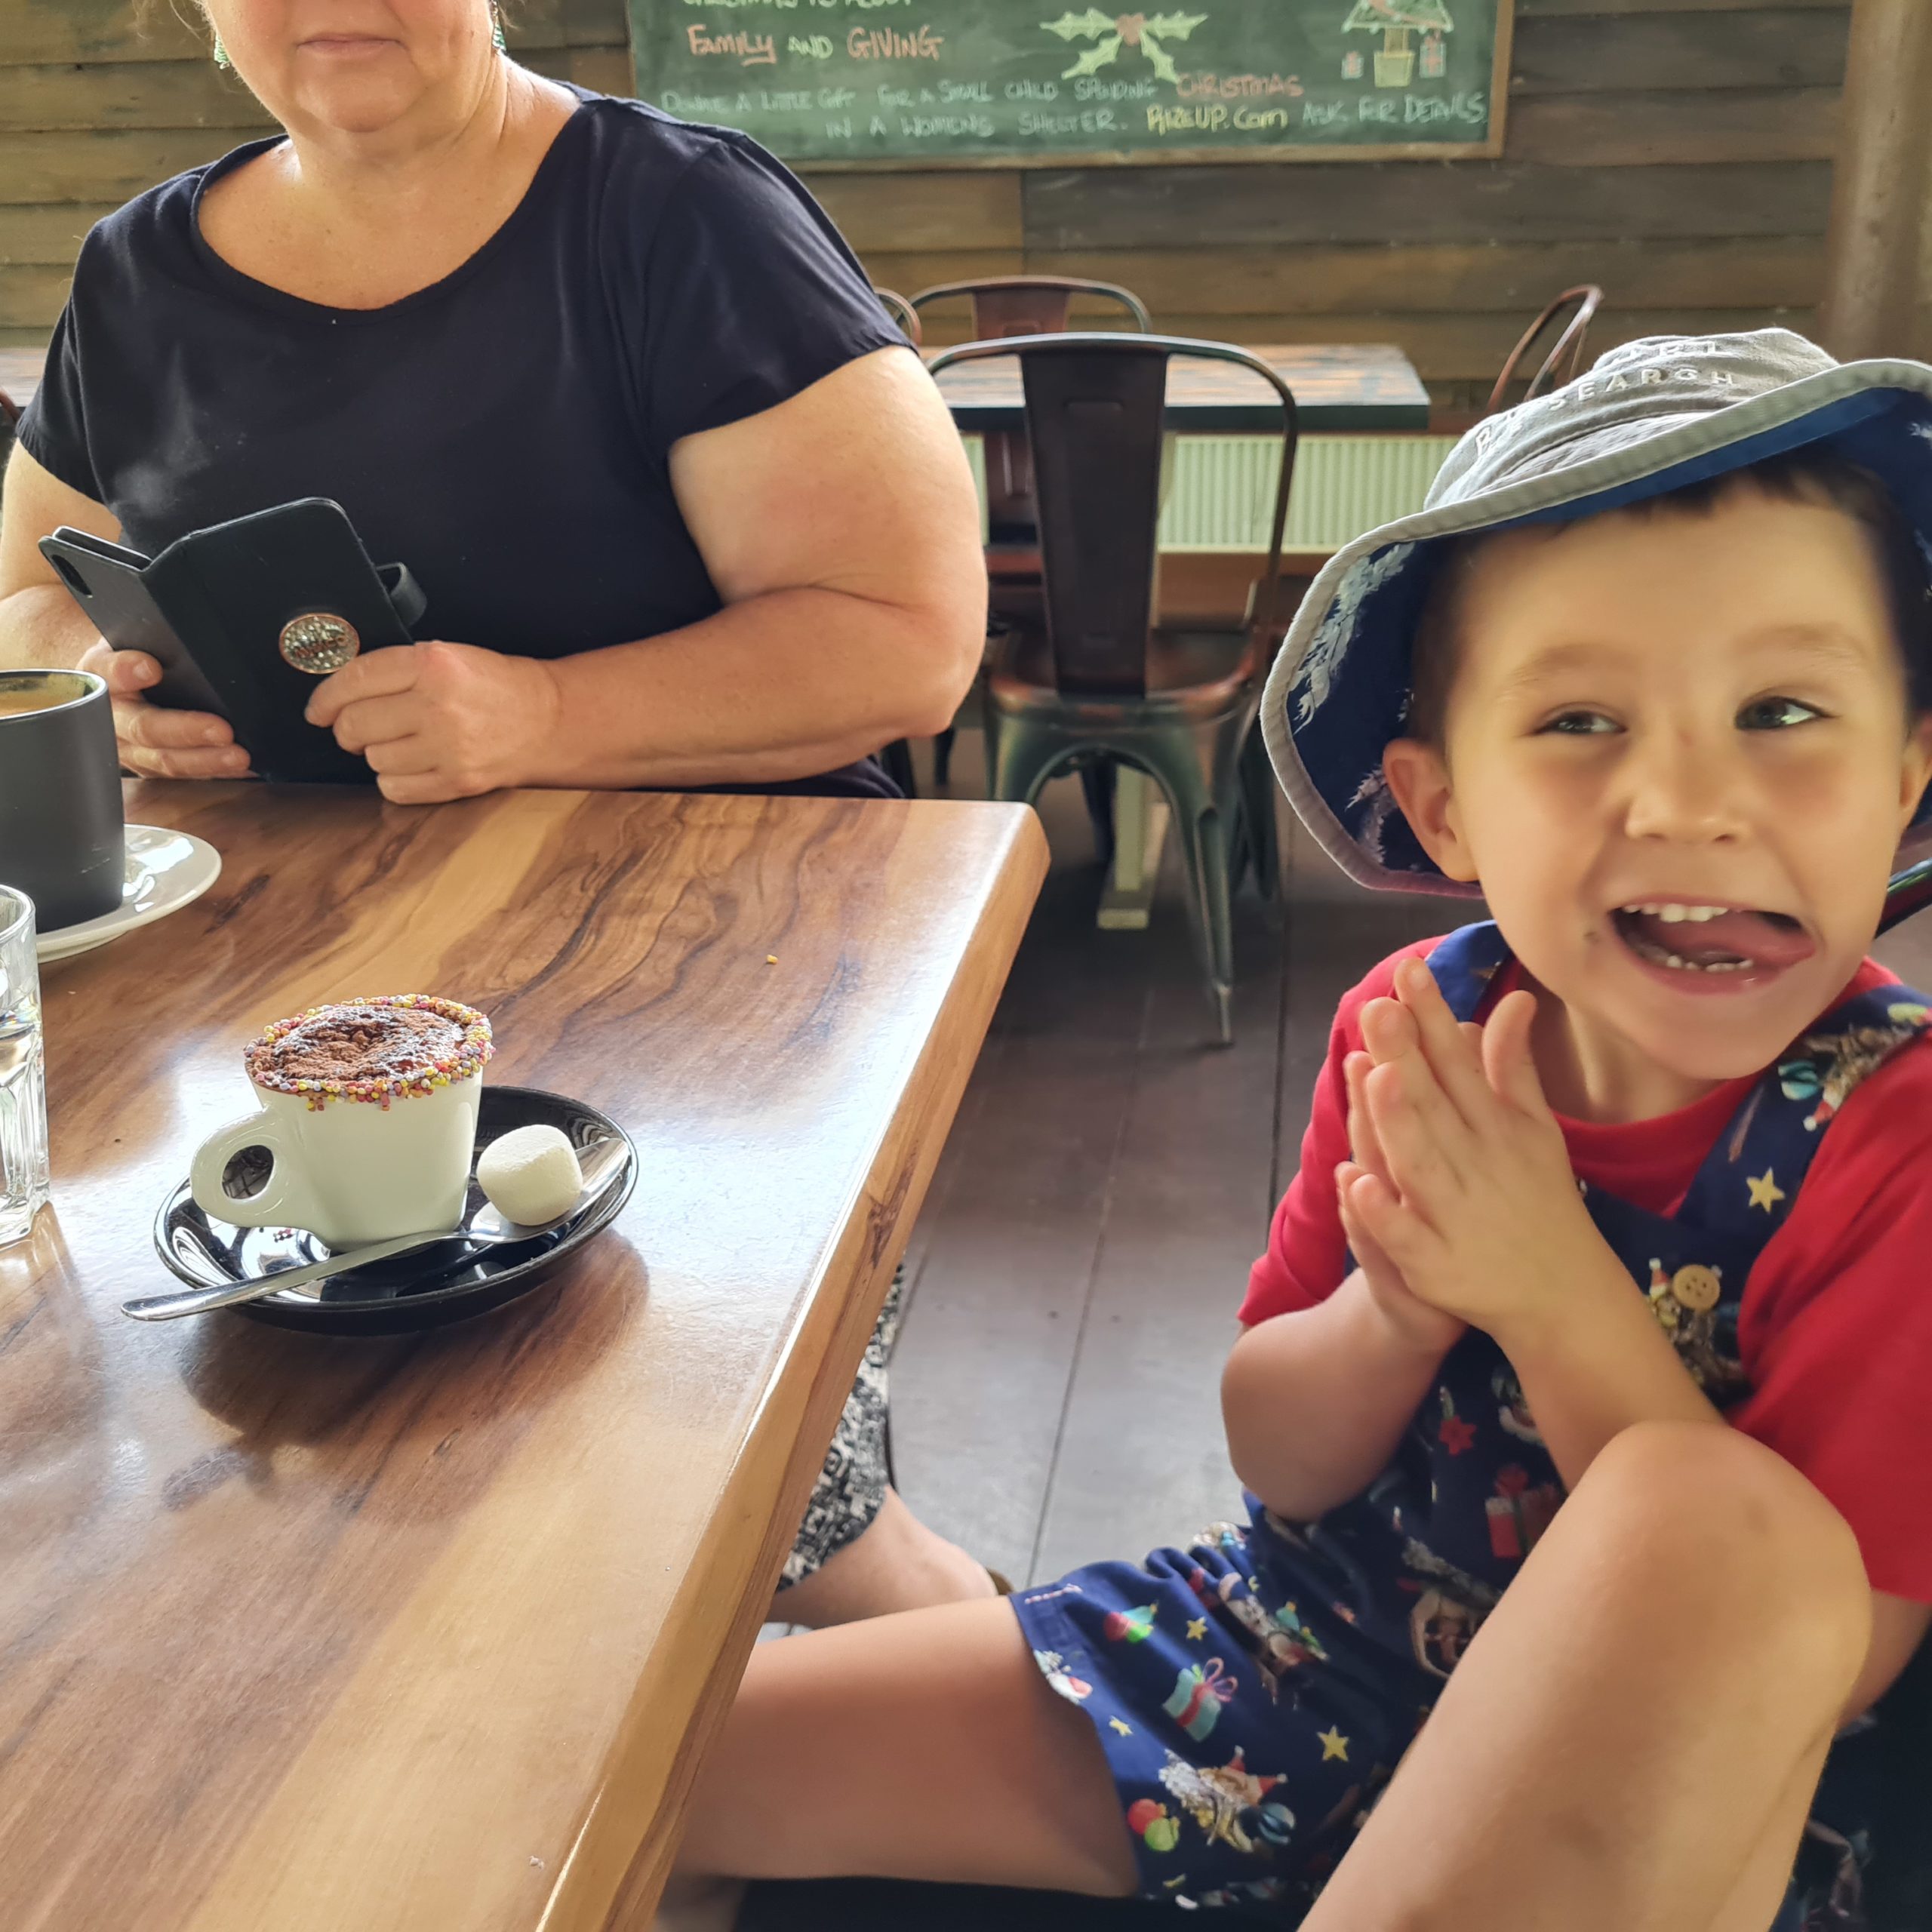 Toddler friendly cafes